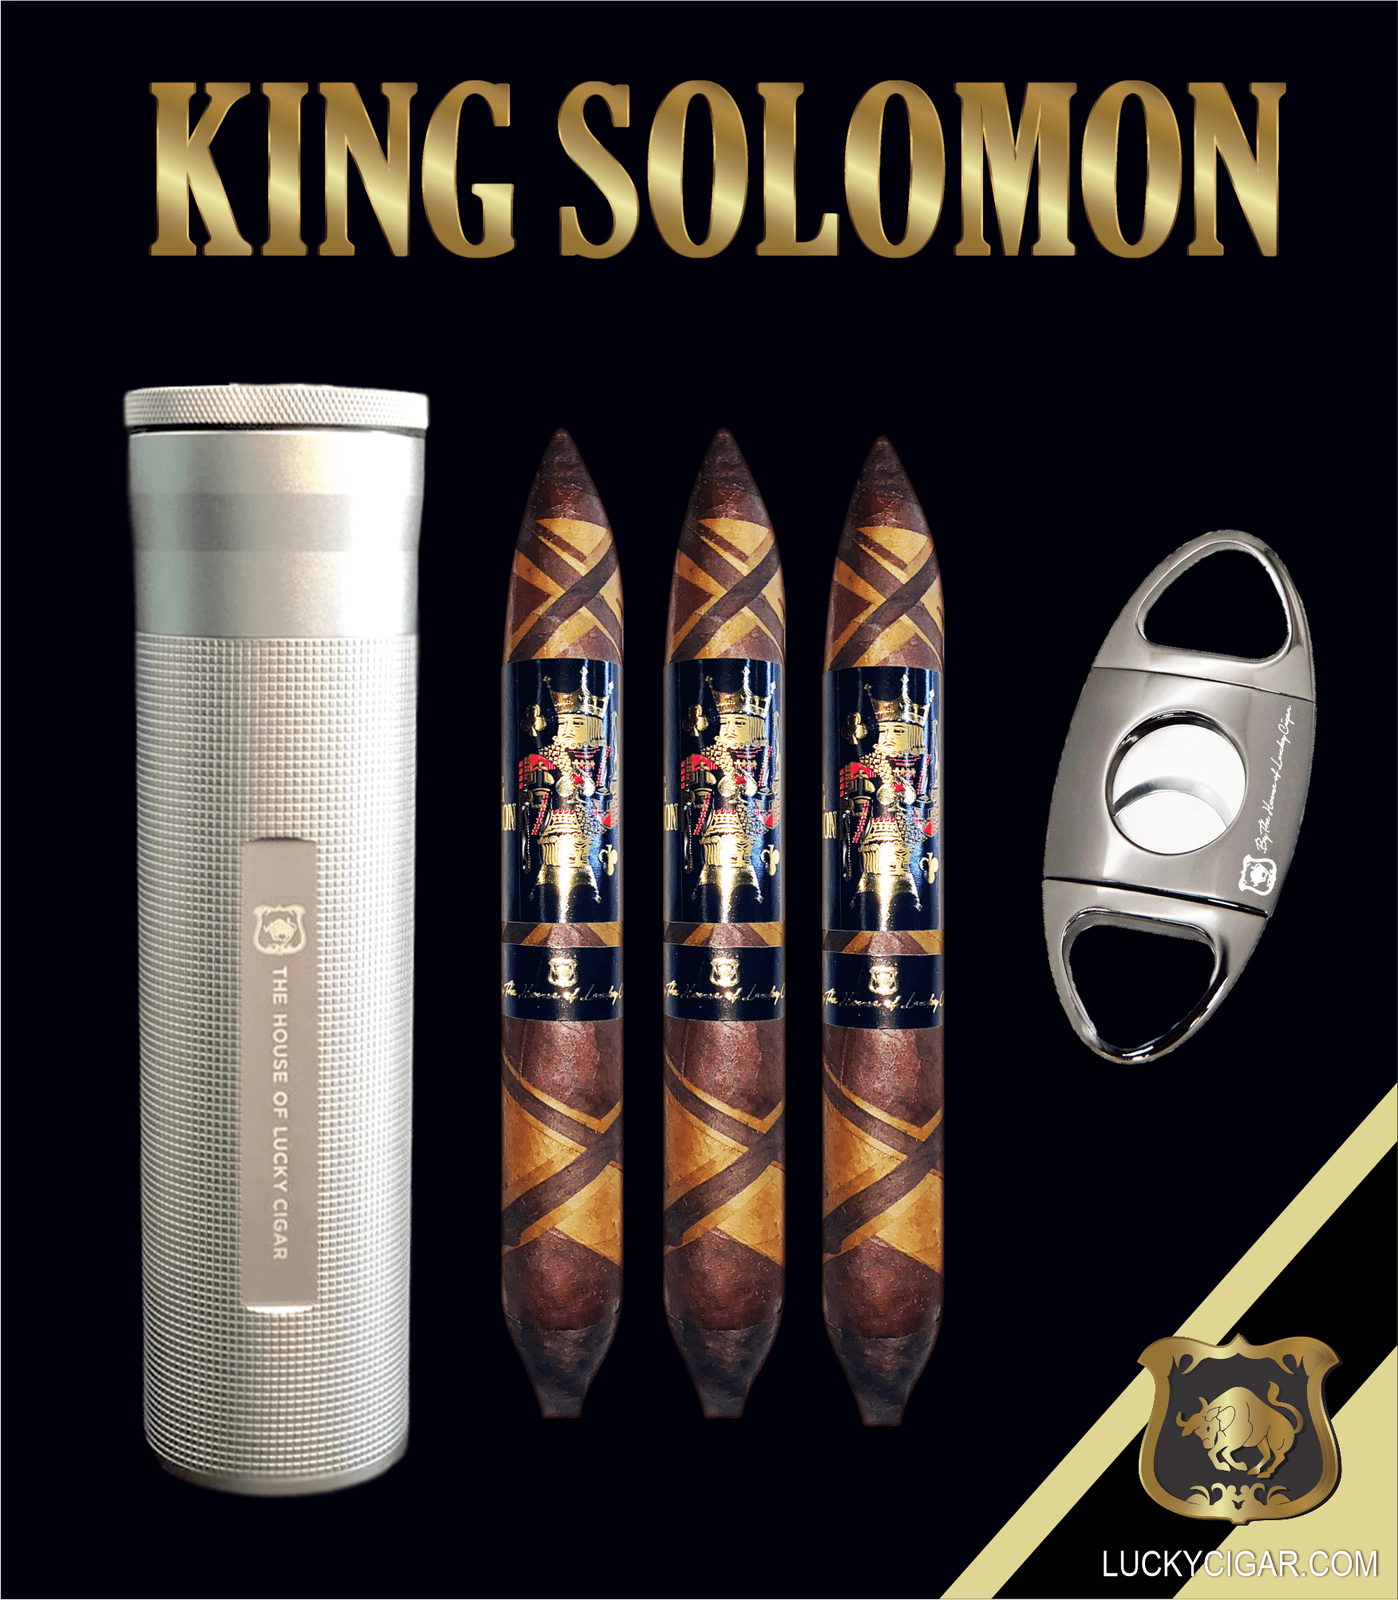 From The King Solomon Series: 3 Solomon 7x60 Cigars with Cutter and Humidor Set